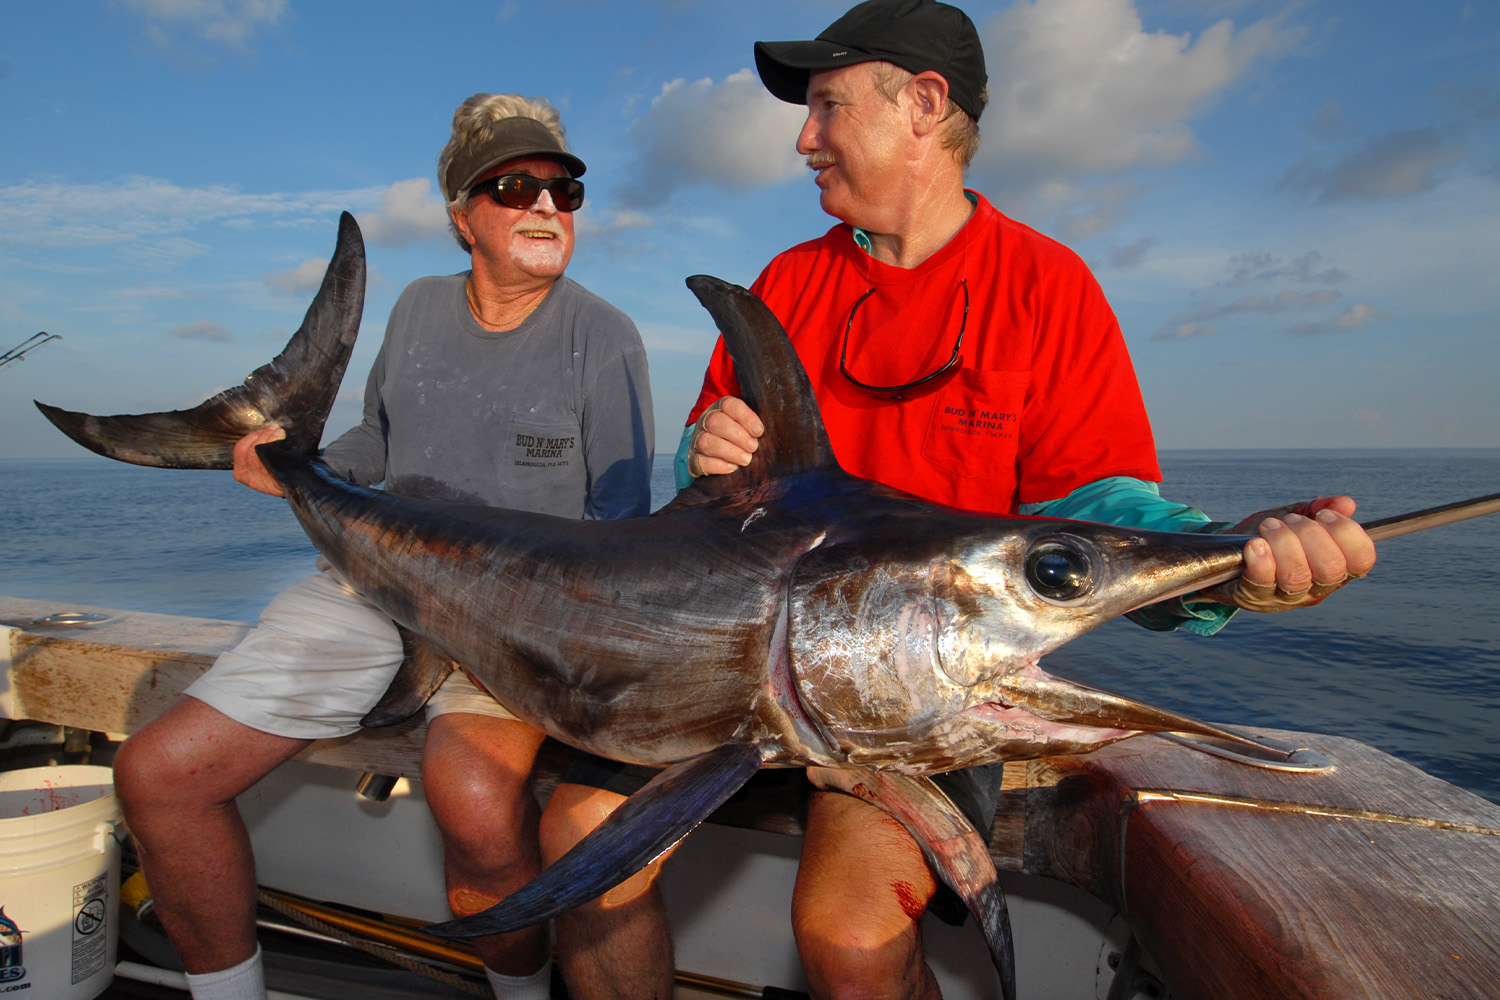 Richard Stanczyk, left, owner of Bud N' Mary's Marina in Islamorada, Fla., holds a swordfish caught during daylight hours by Vic Gaspeny, right, while fishing off Islamorada in the Florida Keys on the Catch 22. Stanczyk and Gaspeny pioneered daytime swordfishing off the Florida Keys.